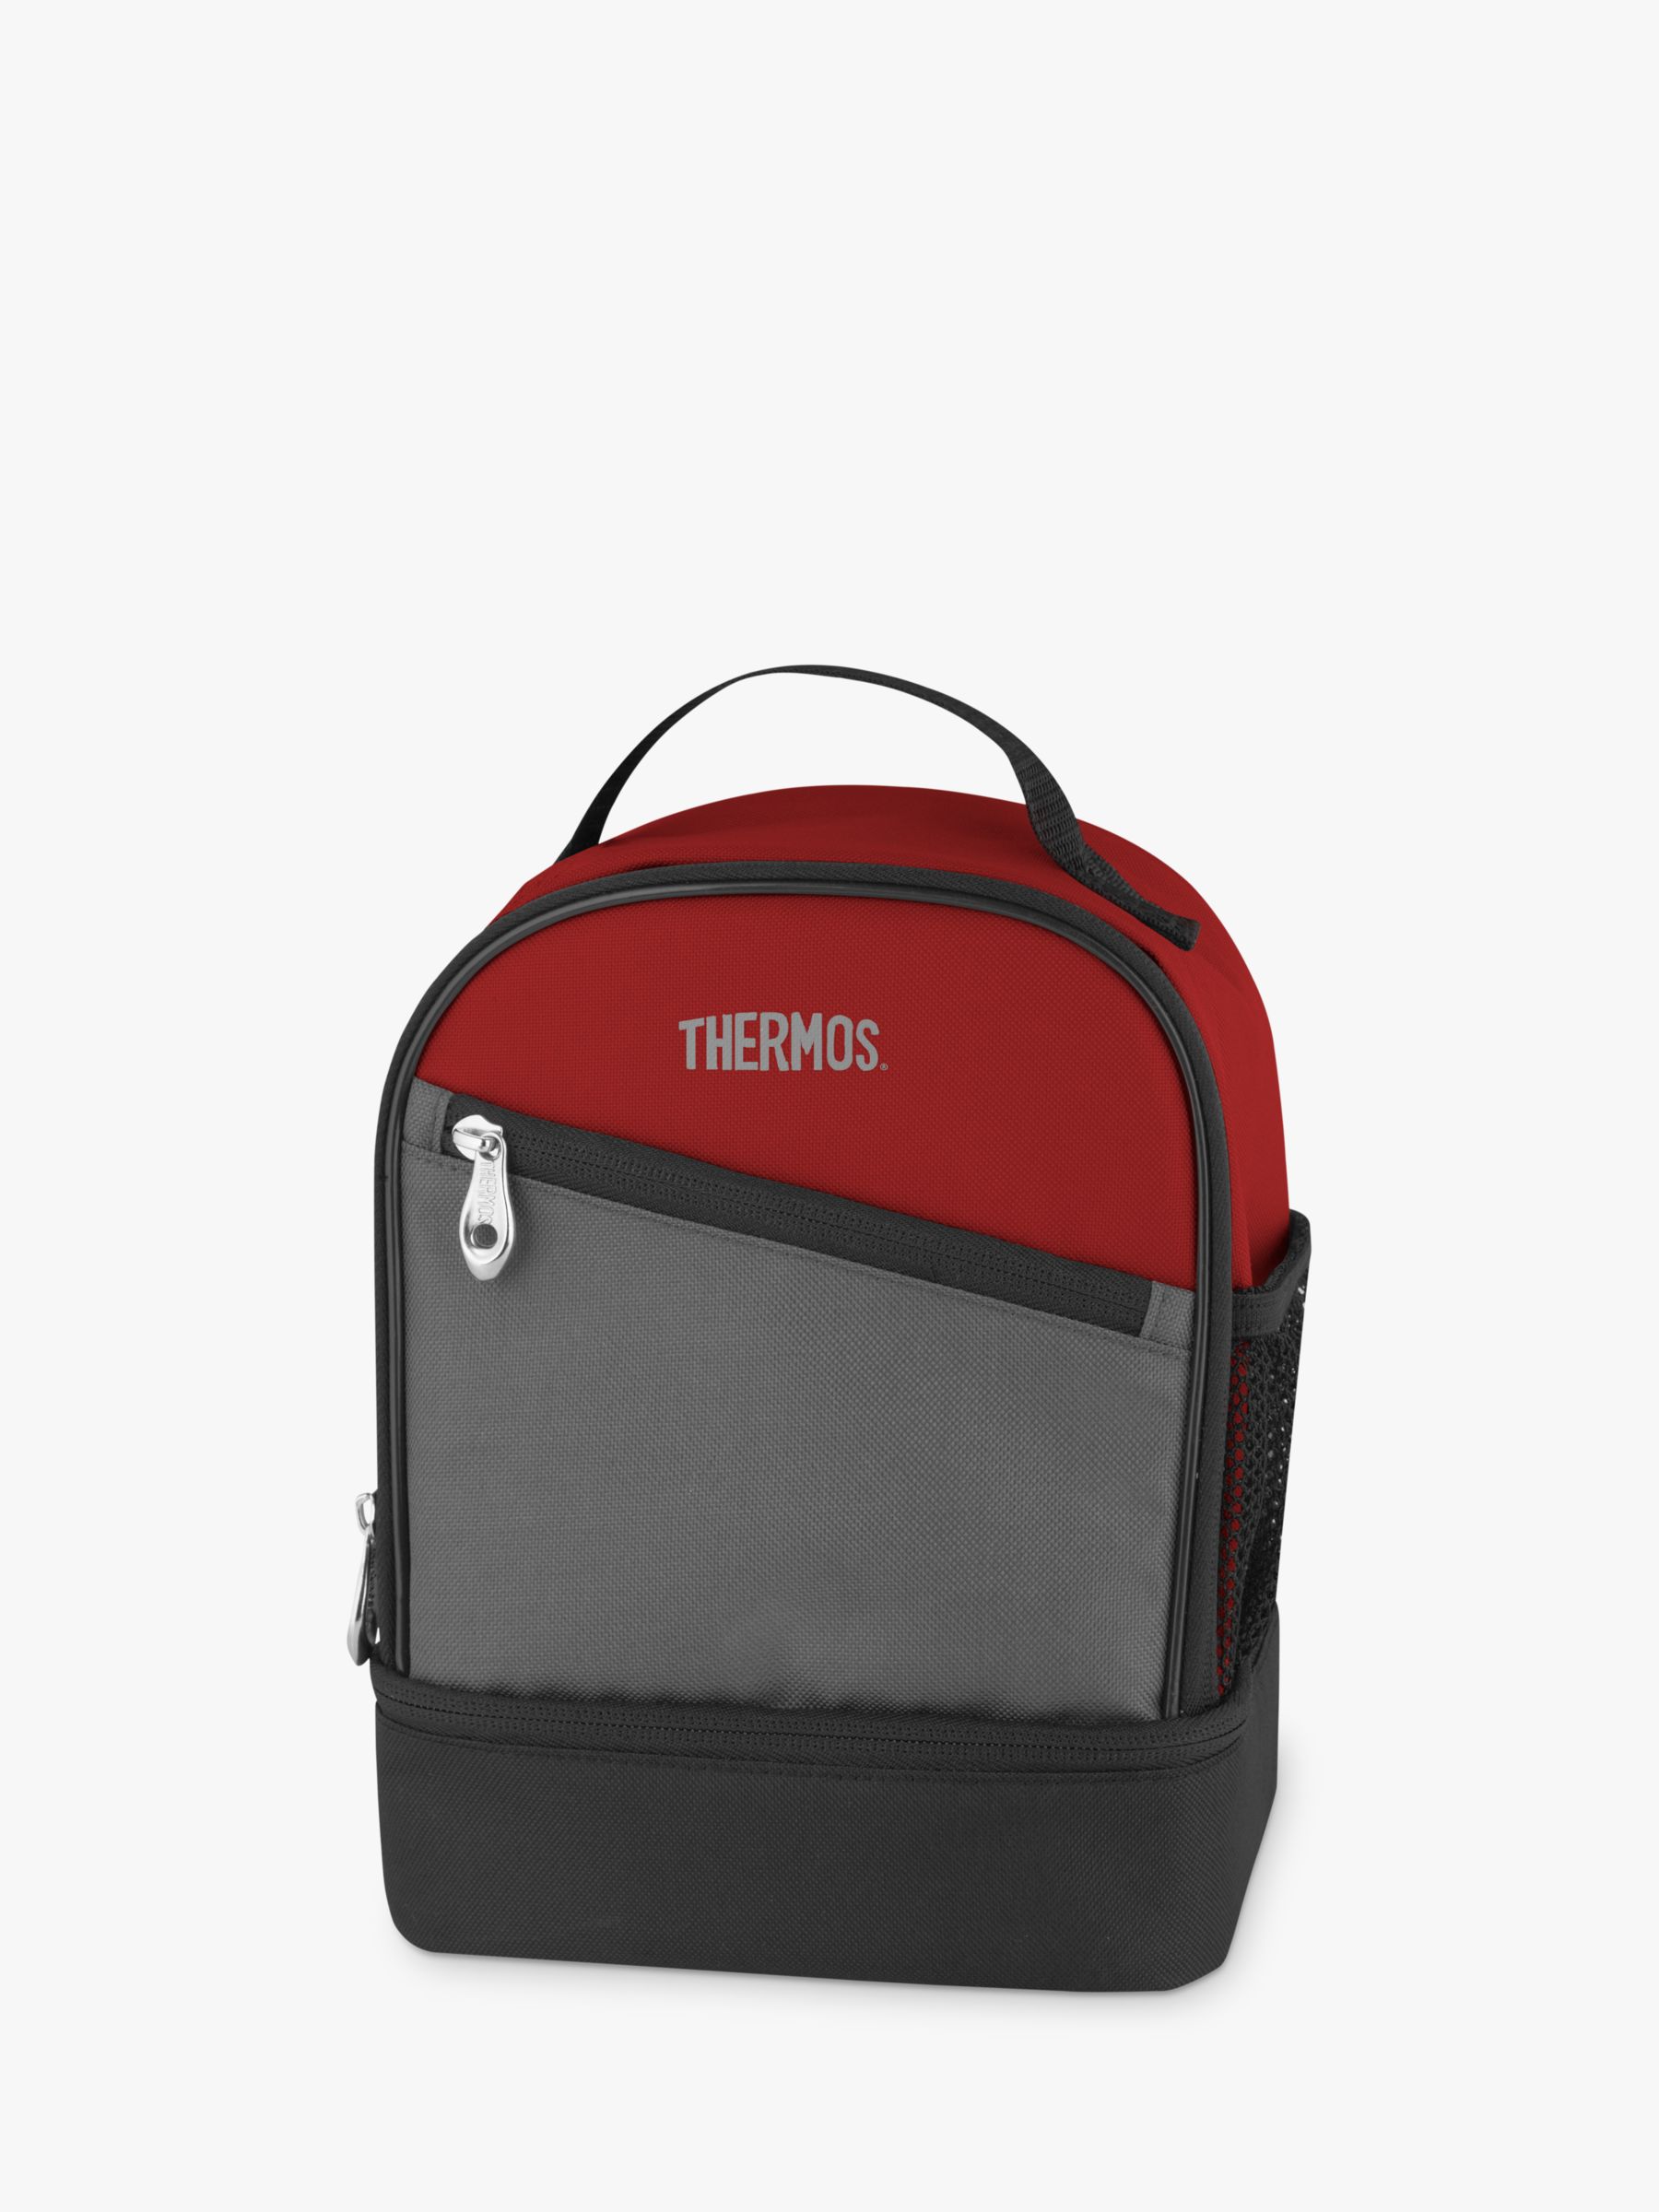 thermos lunch bag